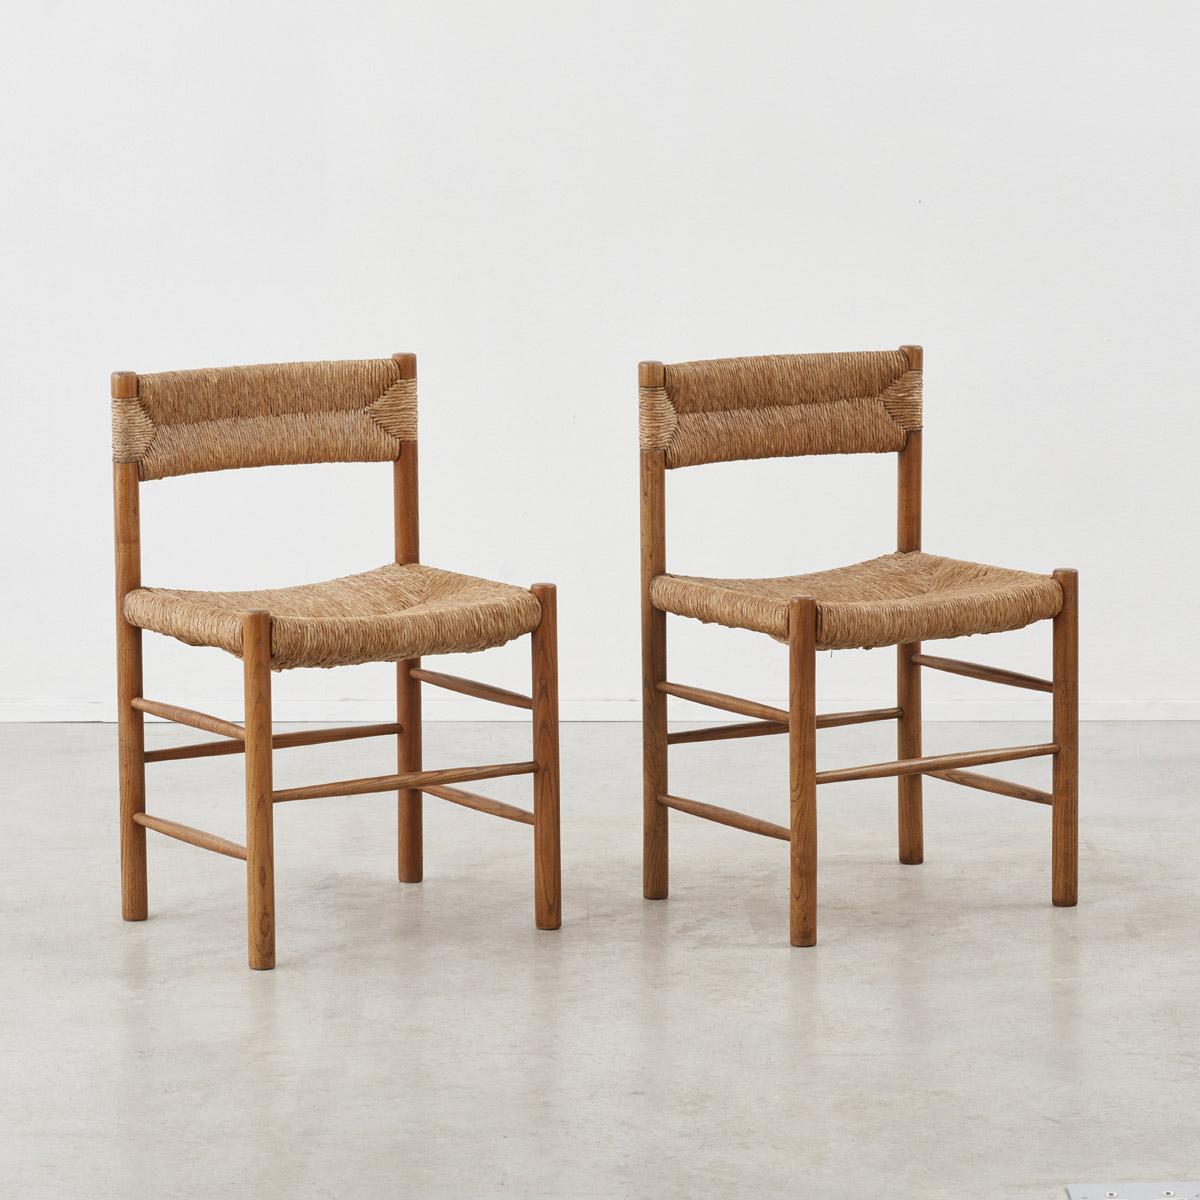 Modern Set of Four Charlotte Perriand Dordogne Chairs for Robert Sentou, France c1950